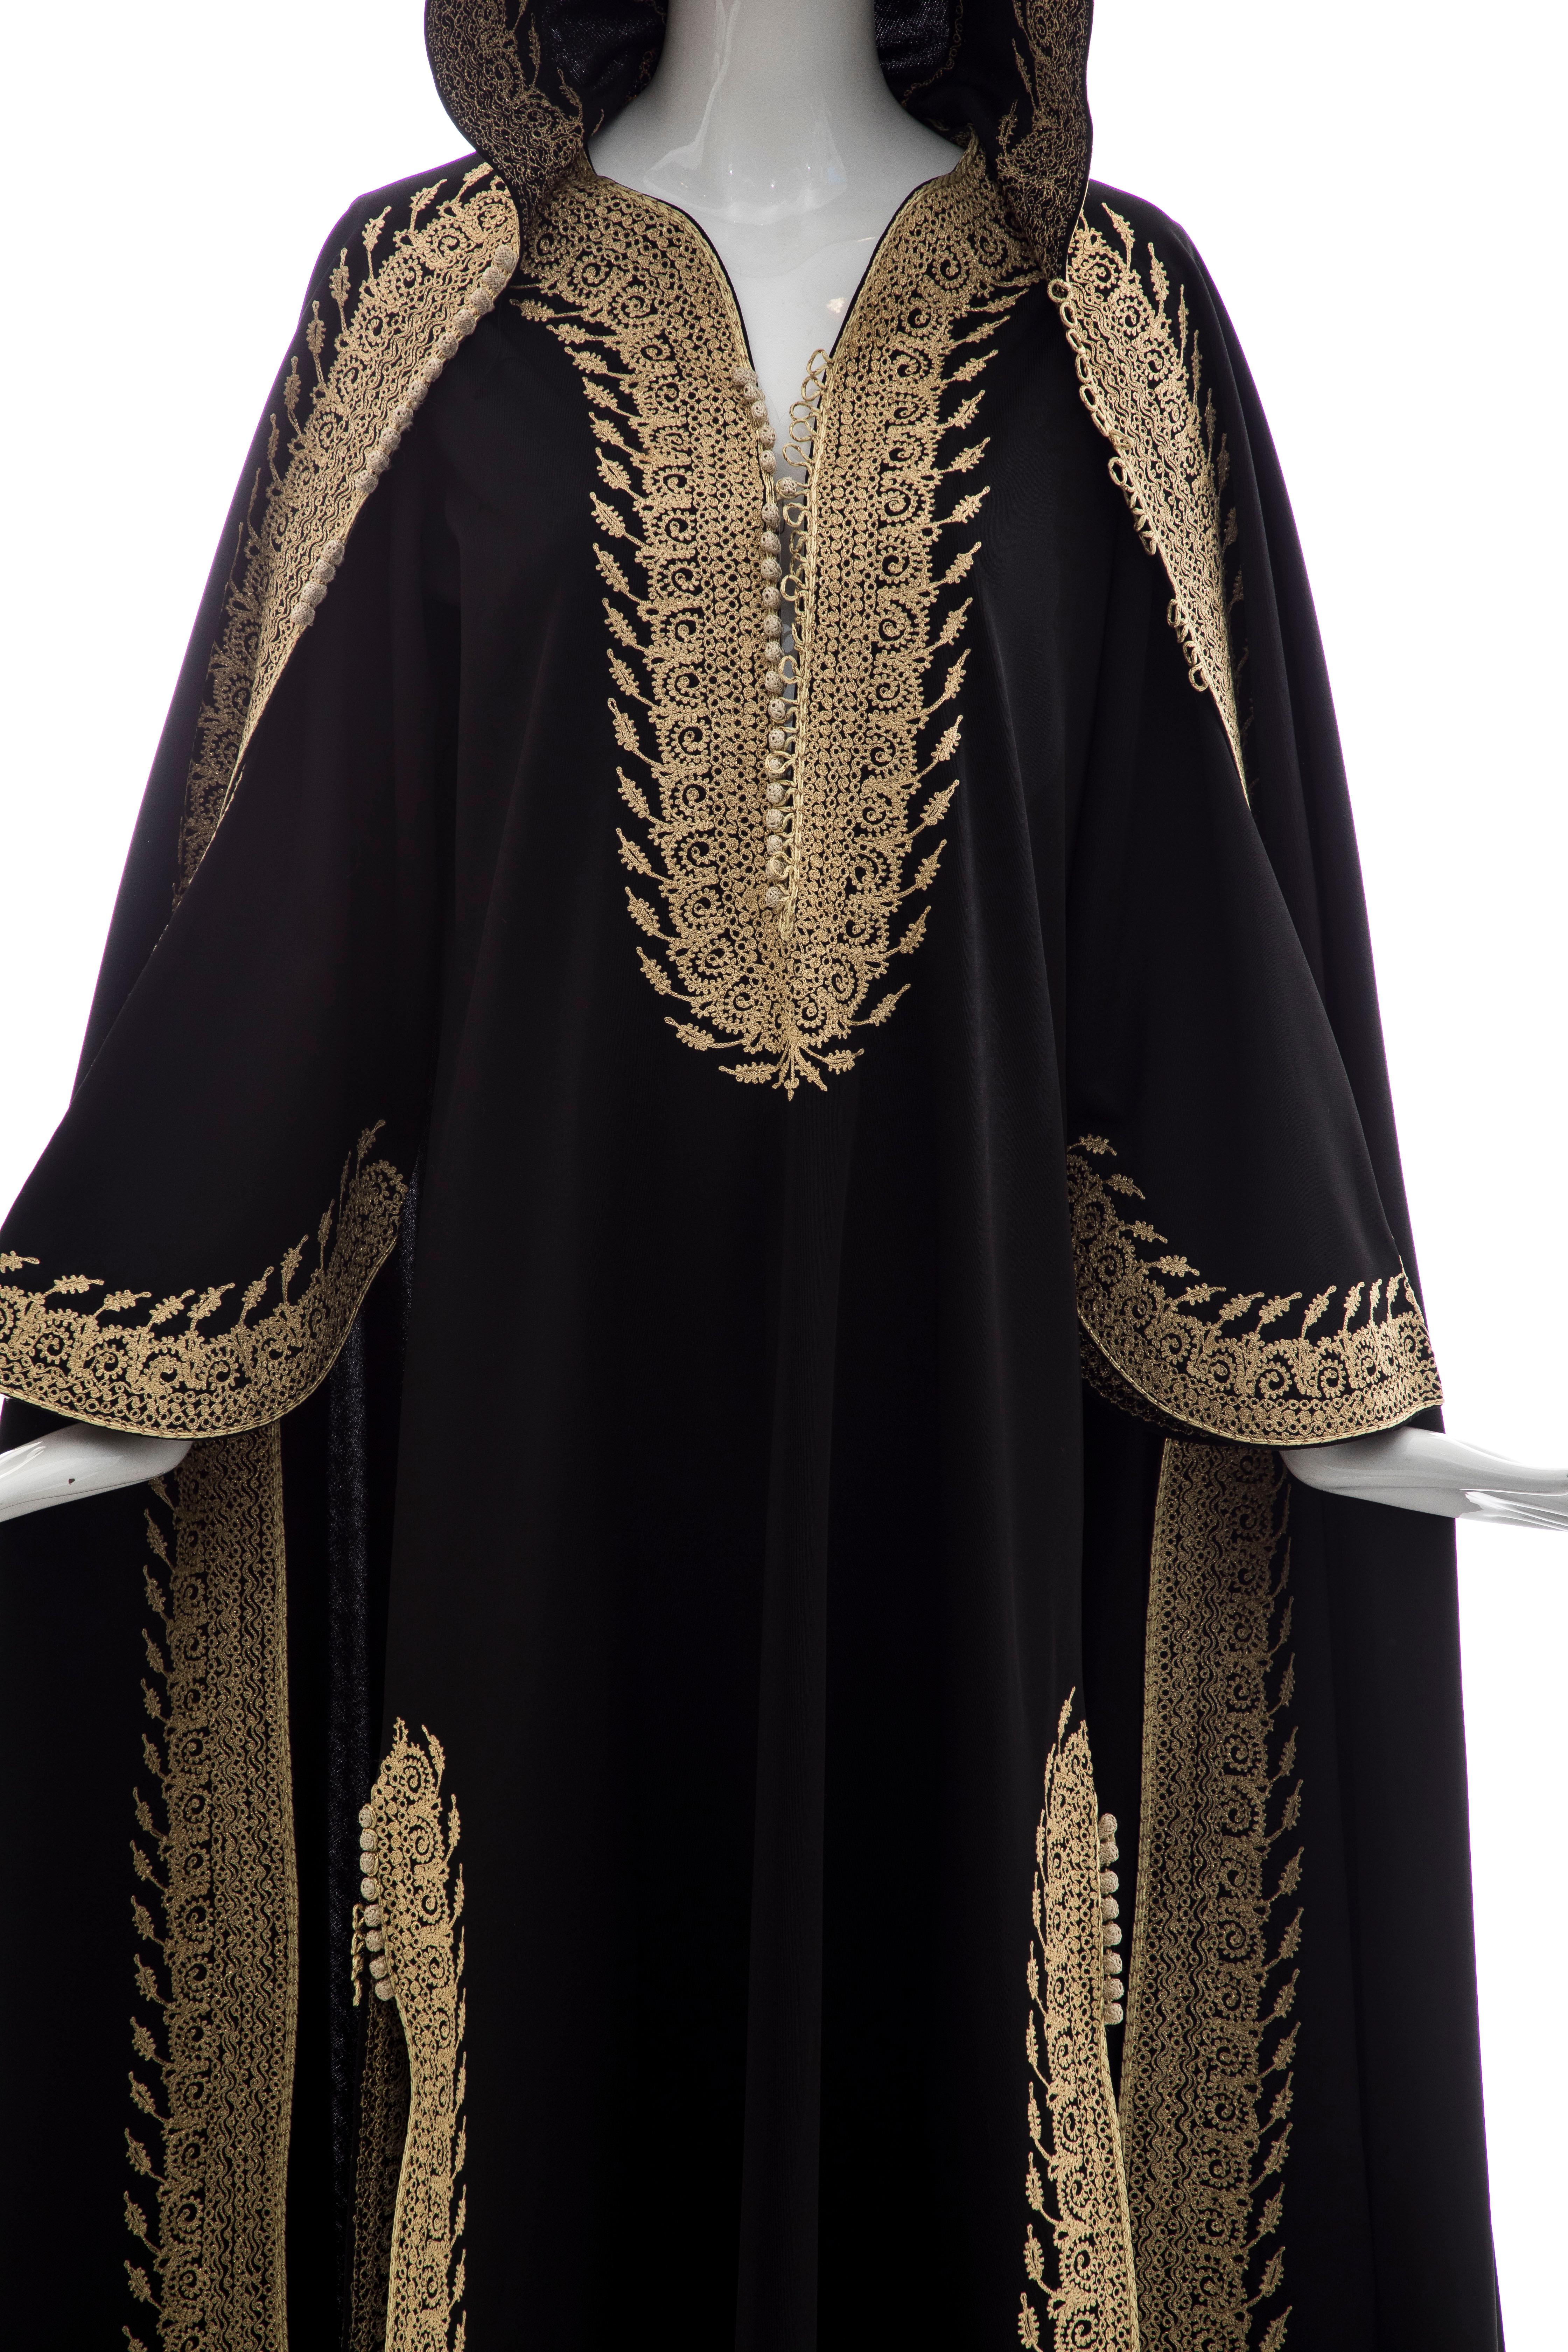 Moroccan Black Kaftan With Gold Embroidery Separate Hooded Cape, Circa 1970's 8